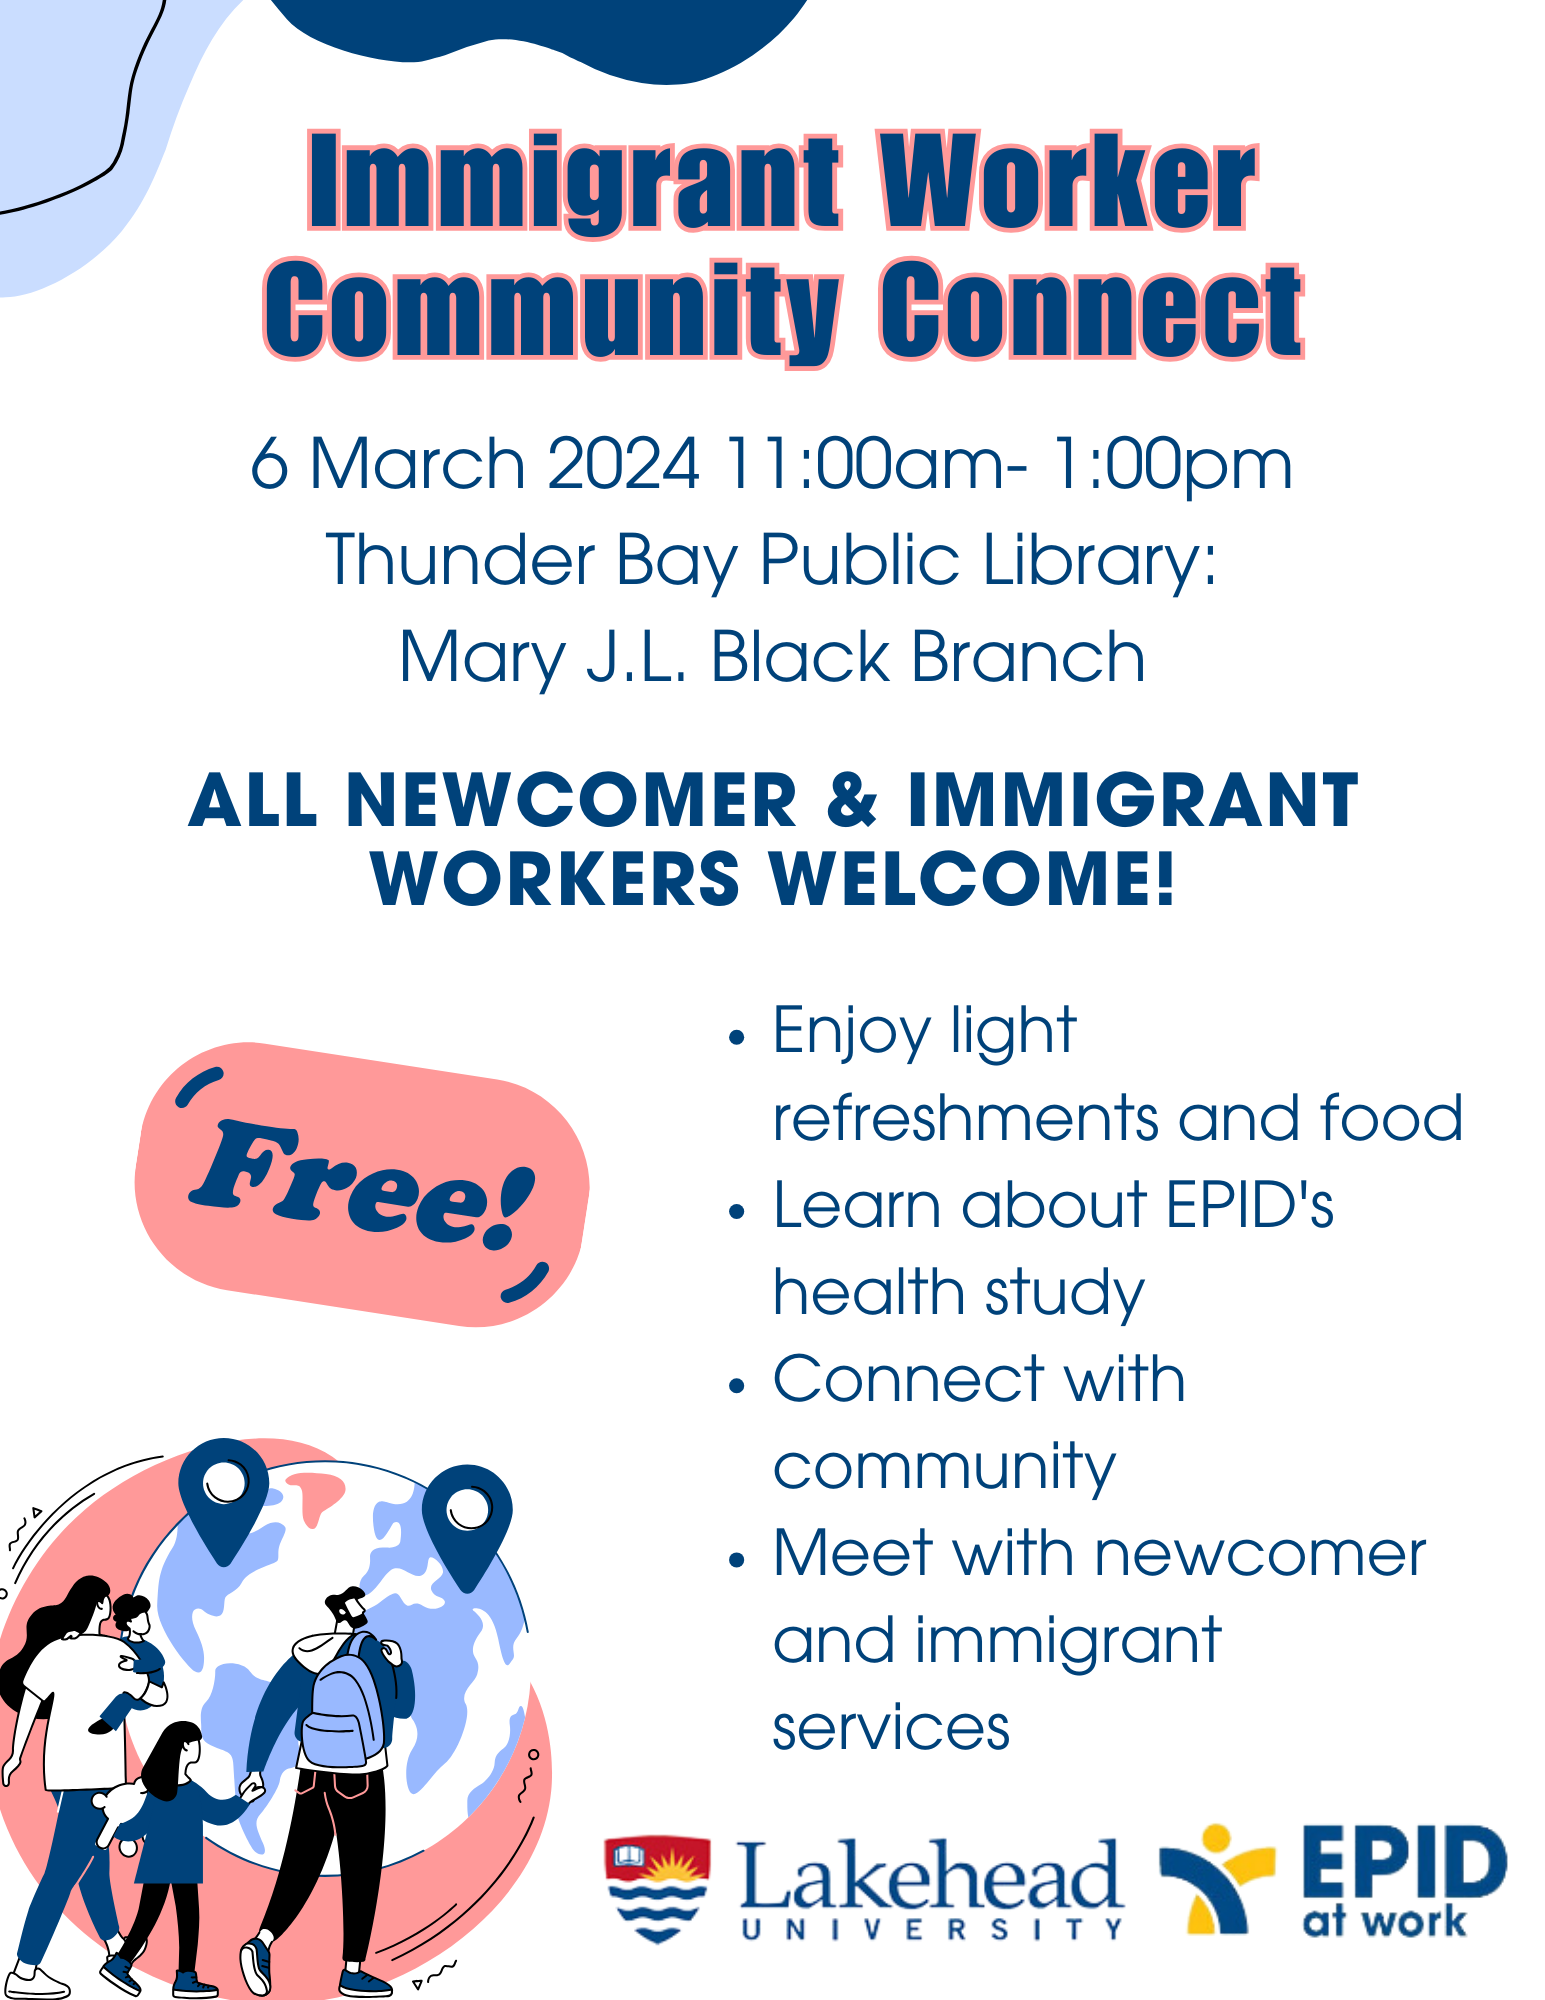 Immigrant Worker Community Connect event poster